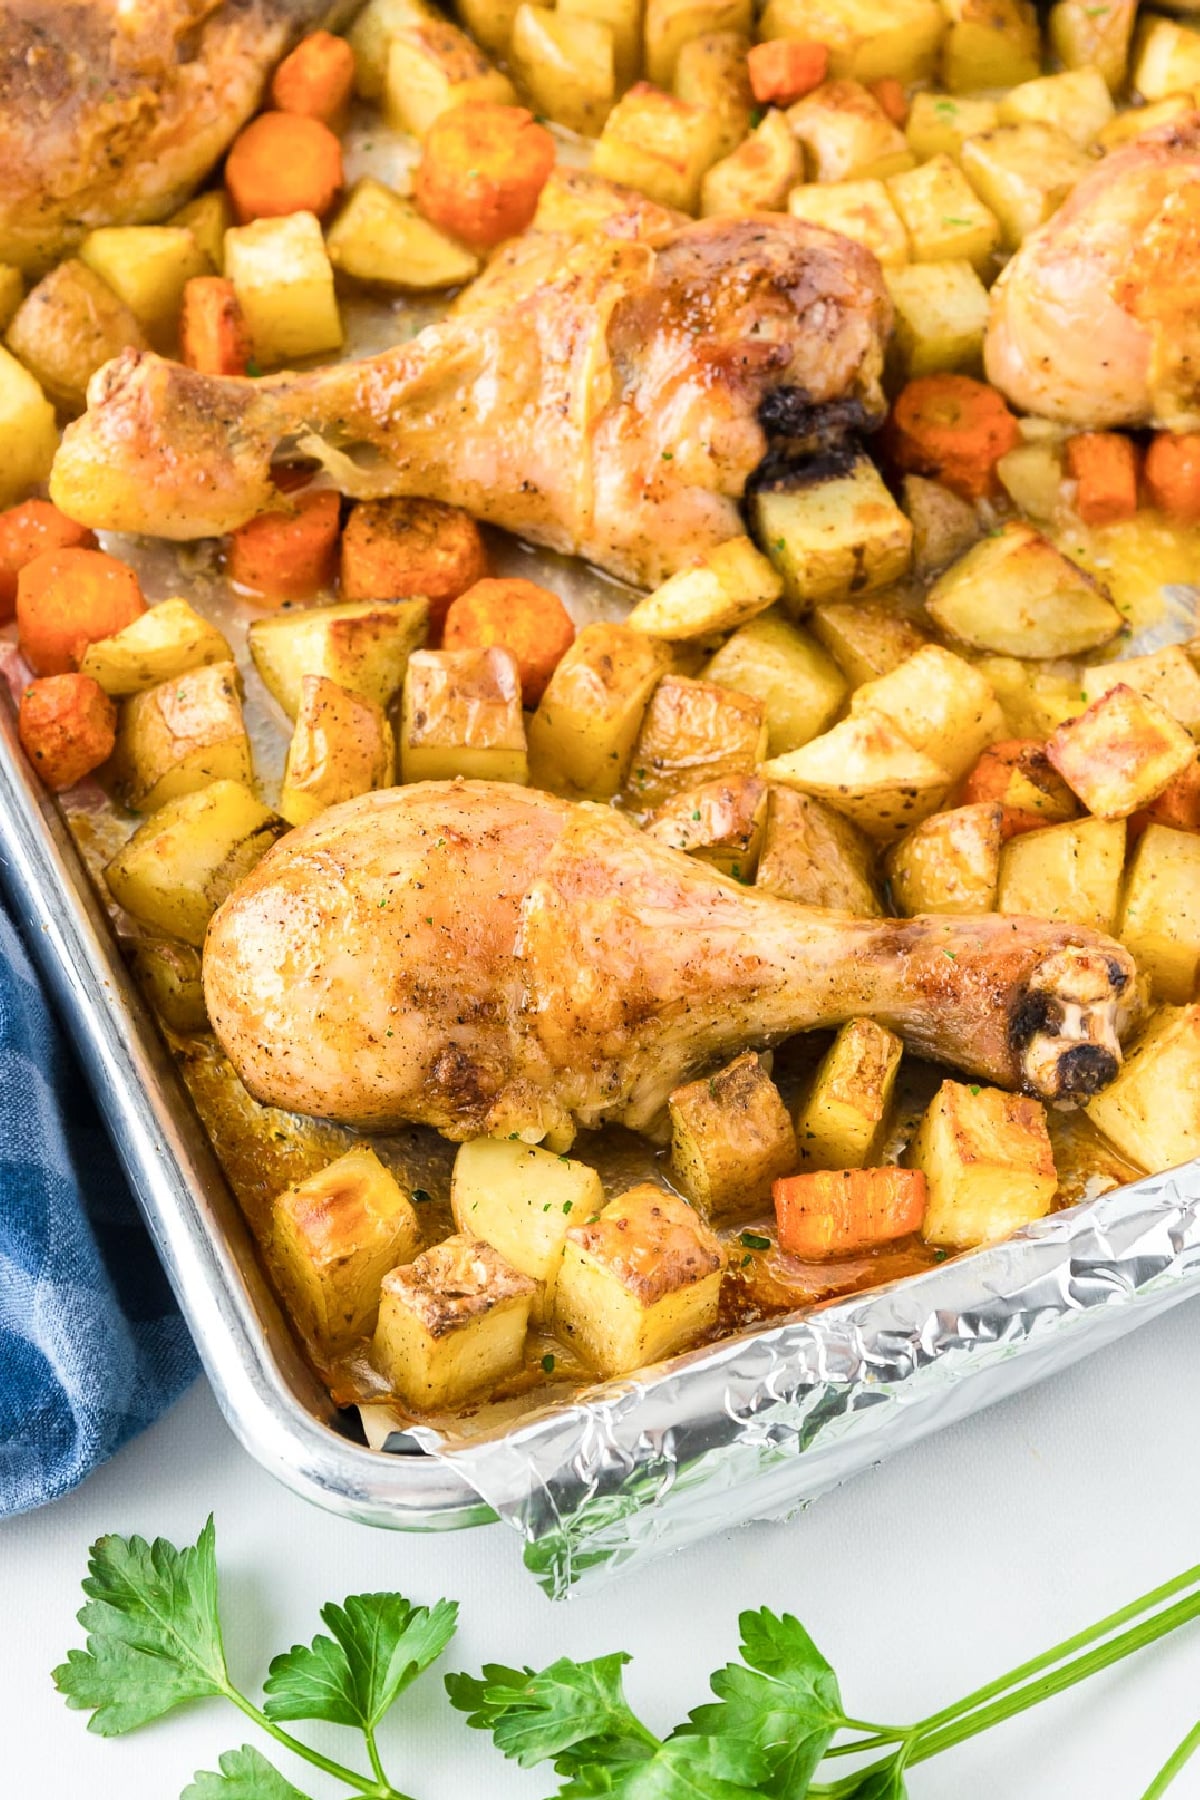 Roasted chicken legs with diced potatoes and carrots in a foil baking tray at an angle.